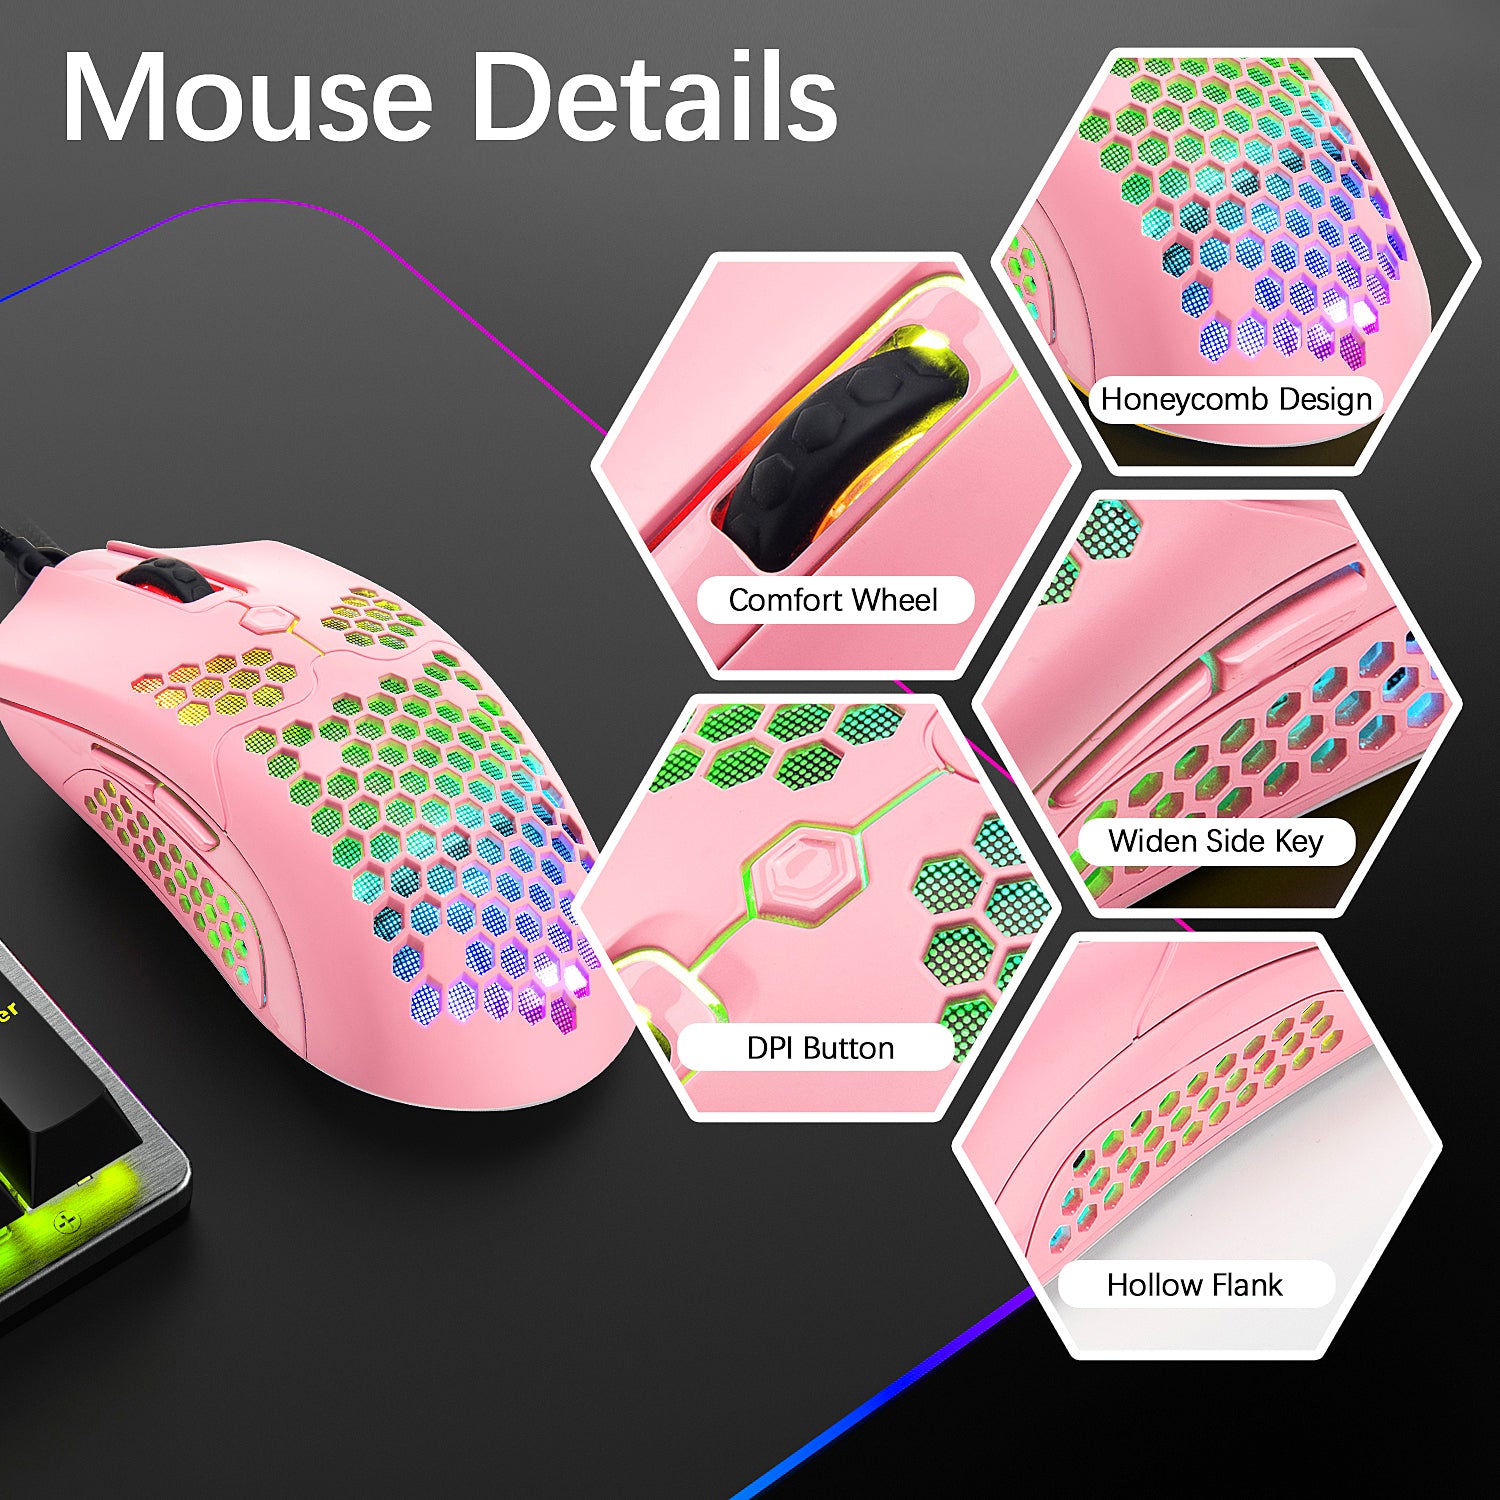 MAMBASNAKE M5 Wired Lightweight Gaming Mouse,26 RGB Backlit Mice with 7 Buttons Programmable Driver,PAW3325 12000DPI Mice, Honeycomb Shell